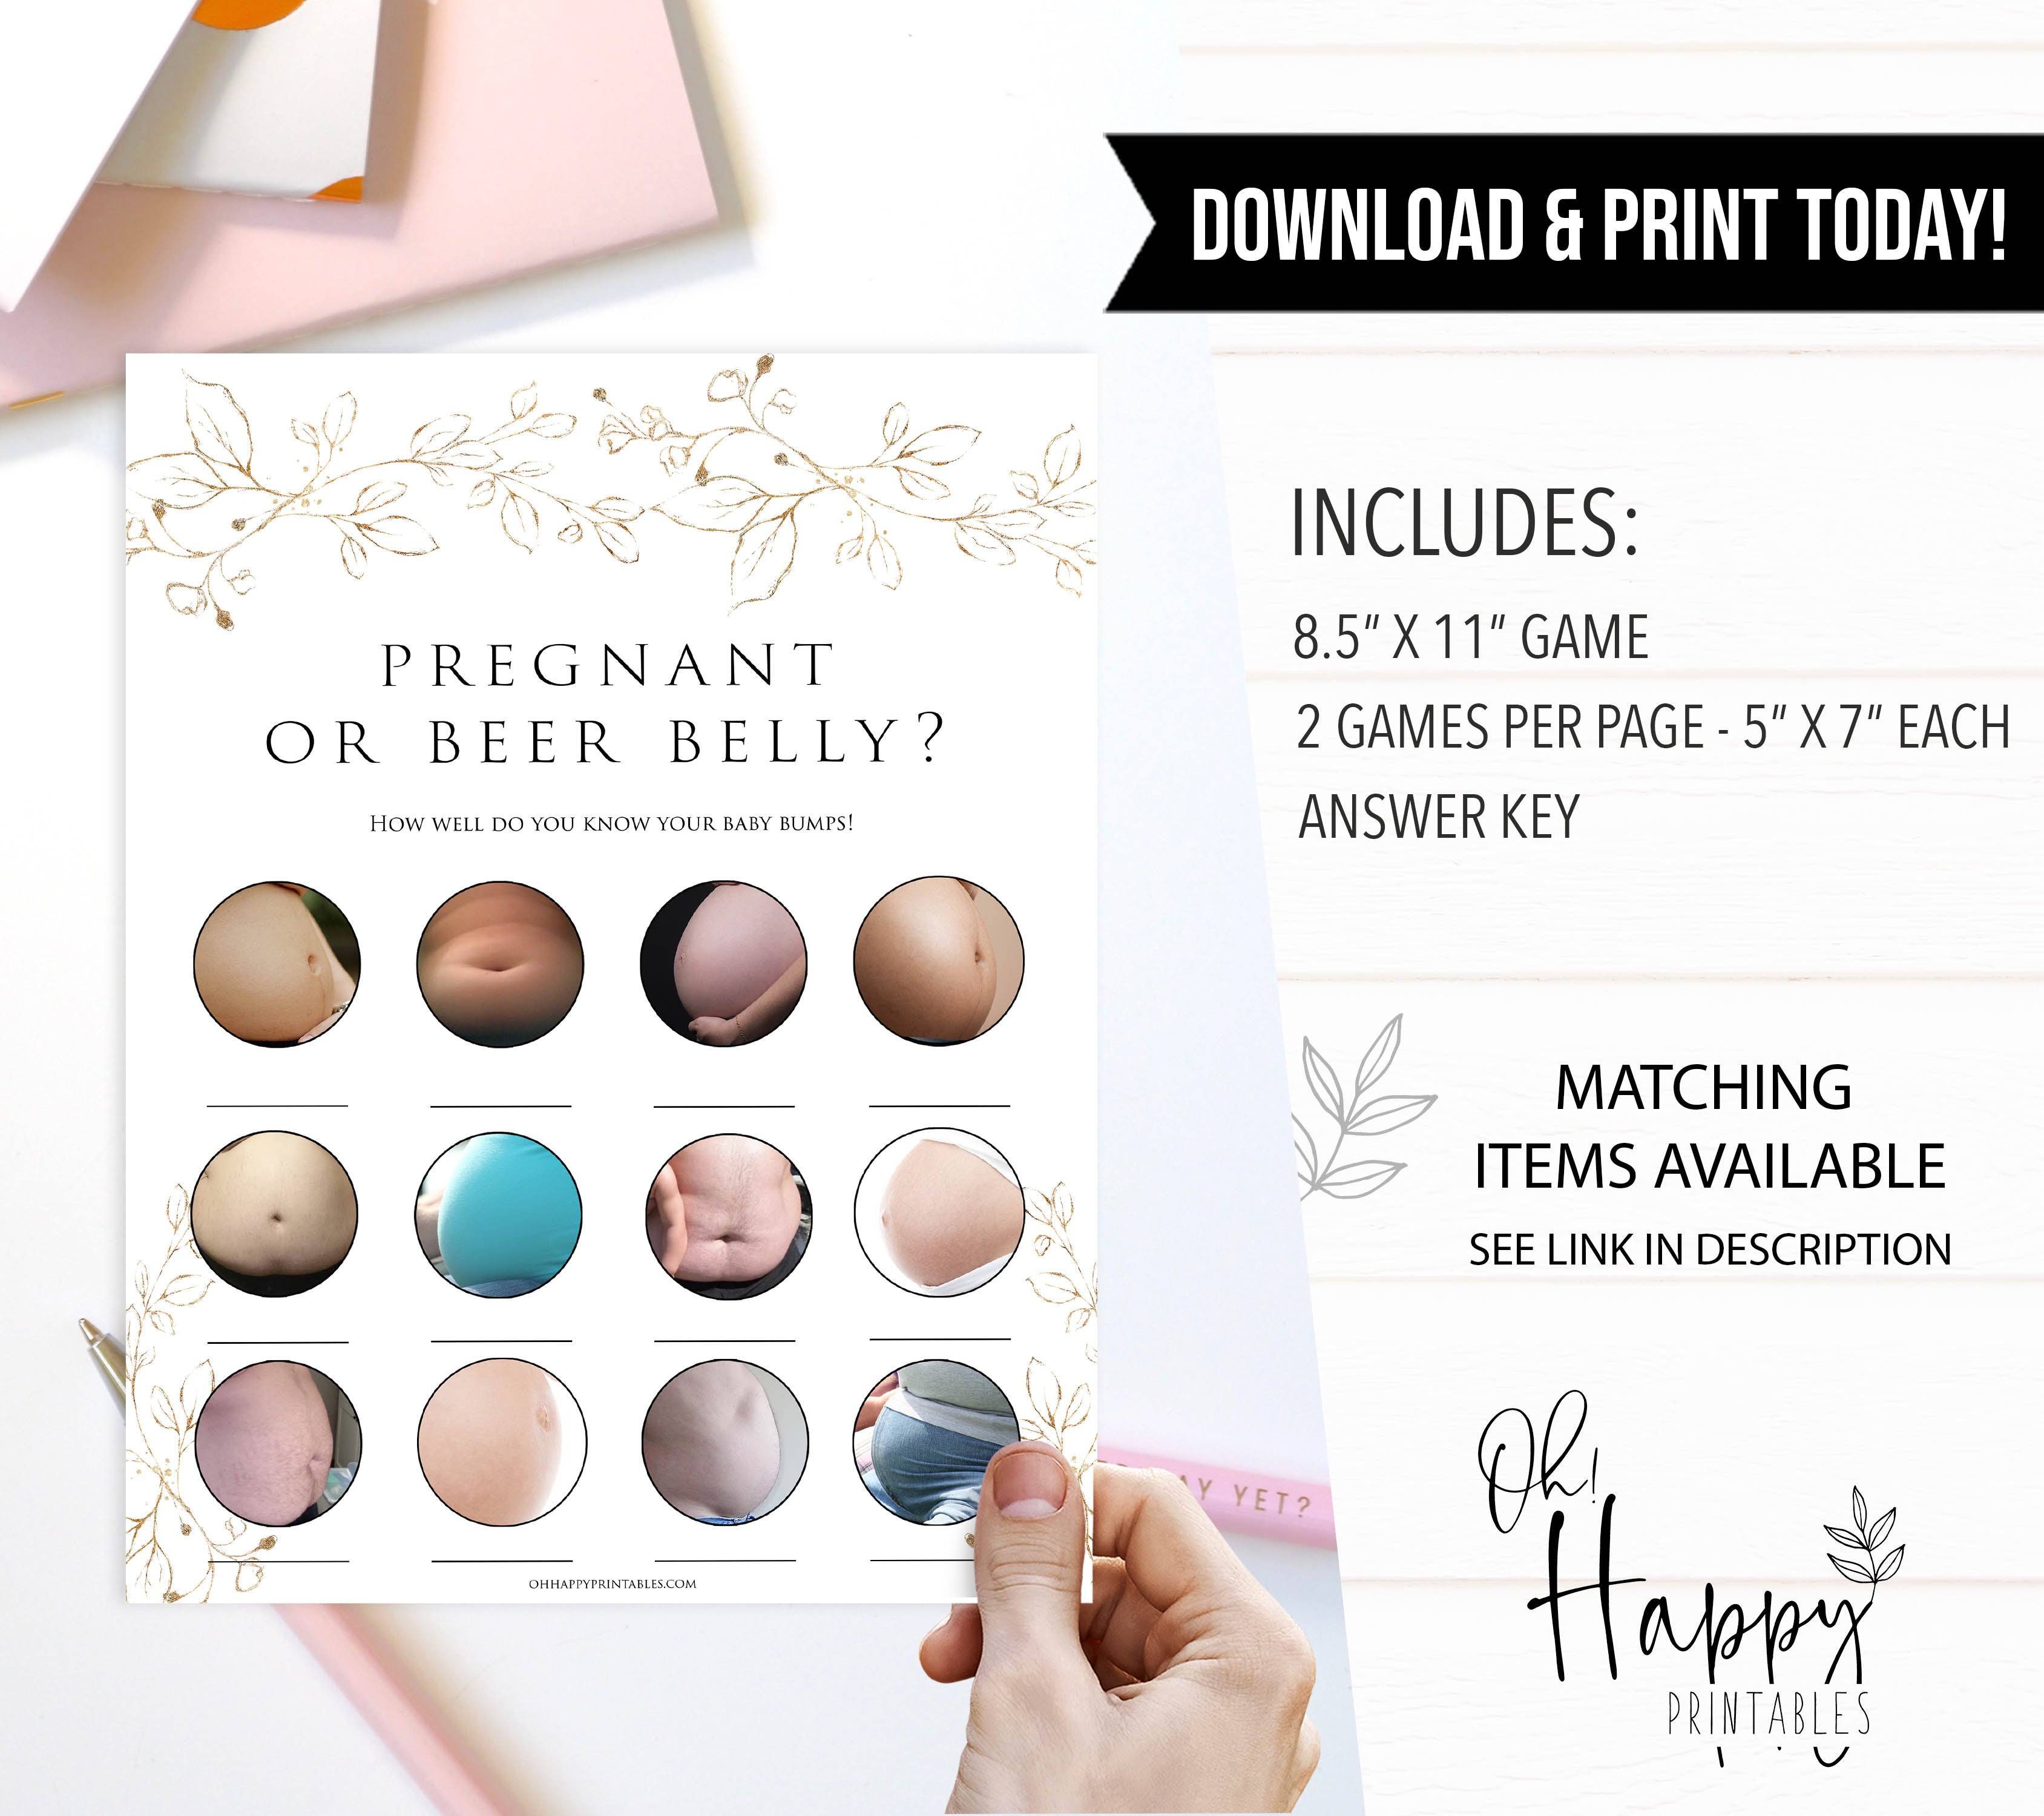 pregnant or beer belly game, Printable baby shower games, gold leaf baby games, baby shower games, fun baby shower ideas, top baby shower ideas, gold leaf baby shower, baby shower games, fun gold leaf baby shower ideas